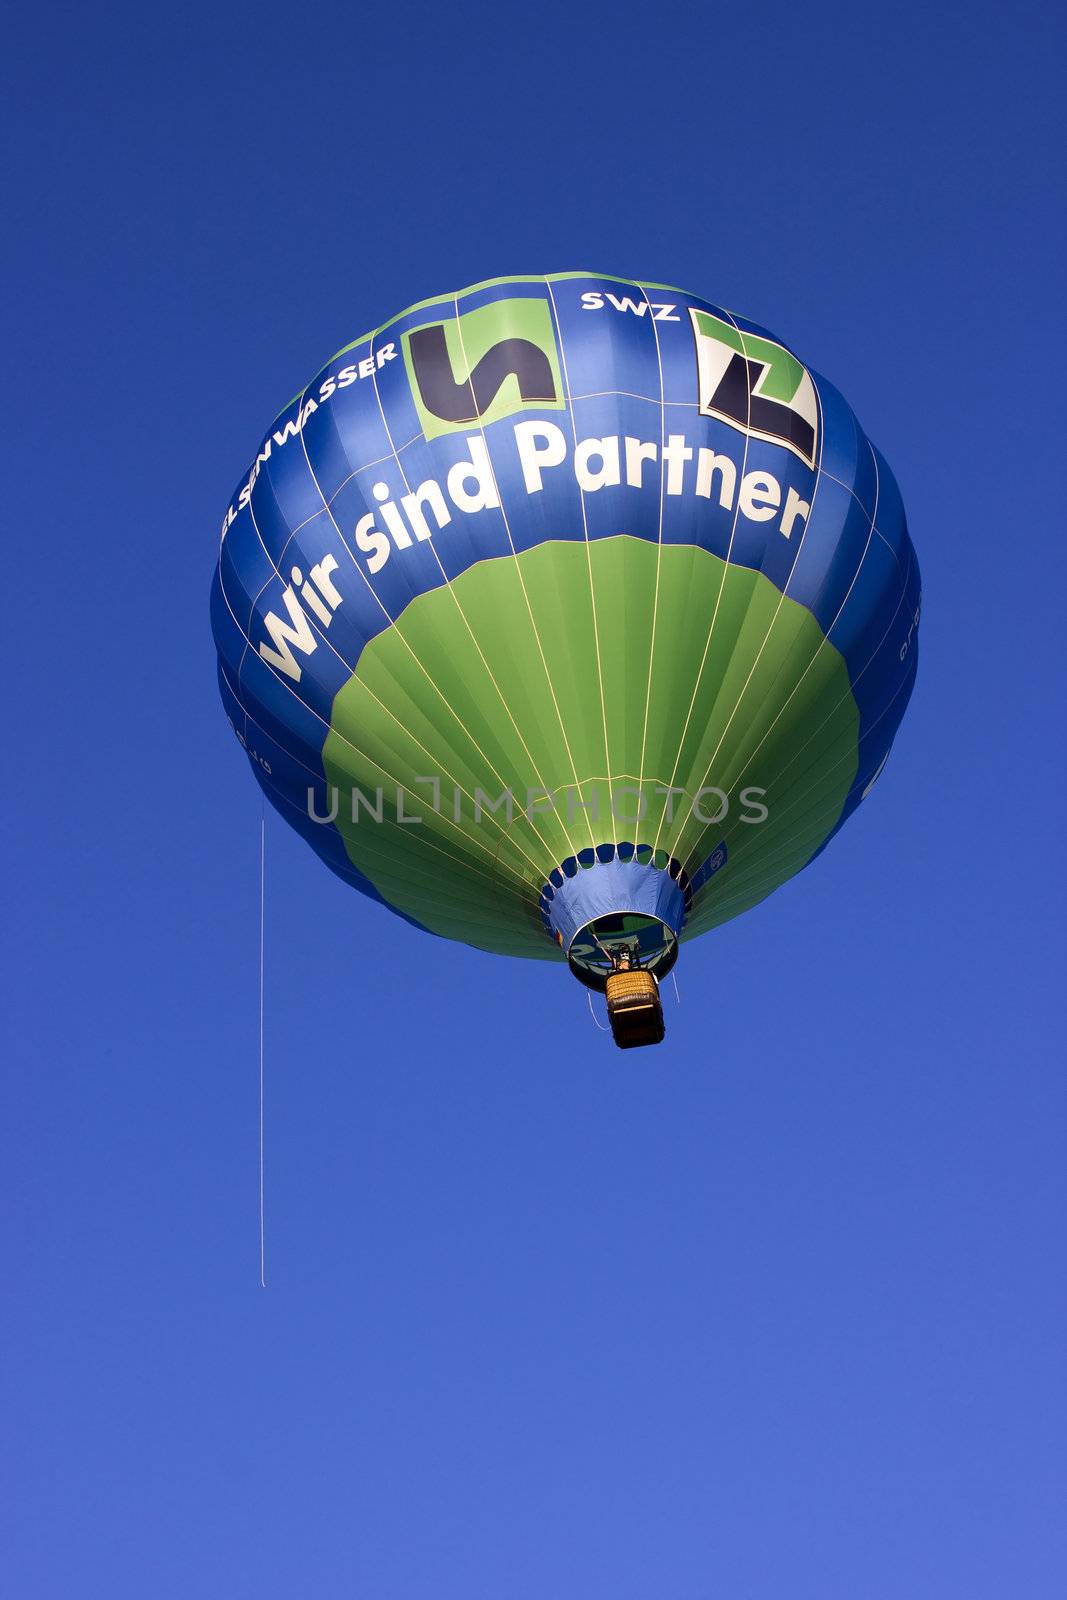 Colorful Hot Air Balloon in Flight